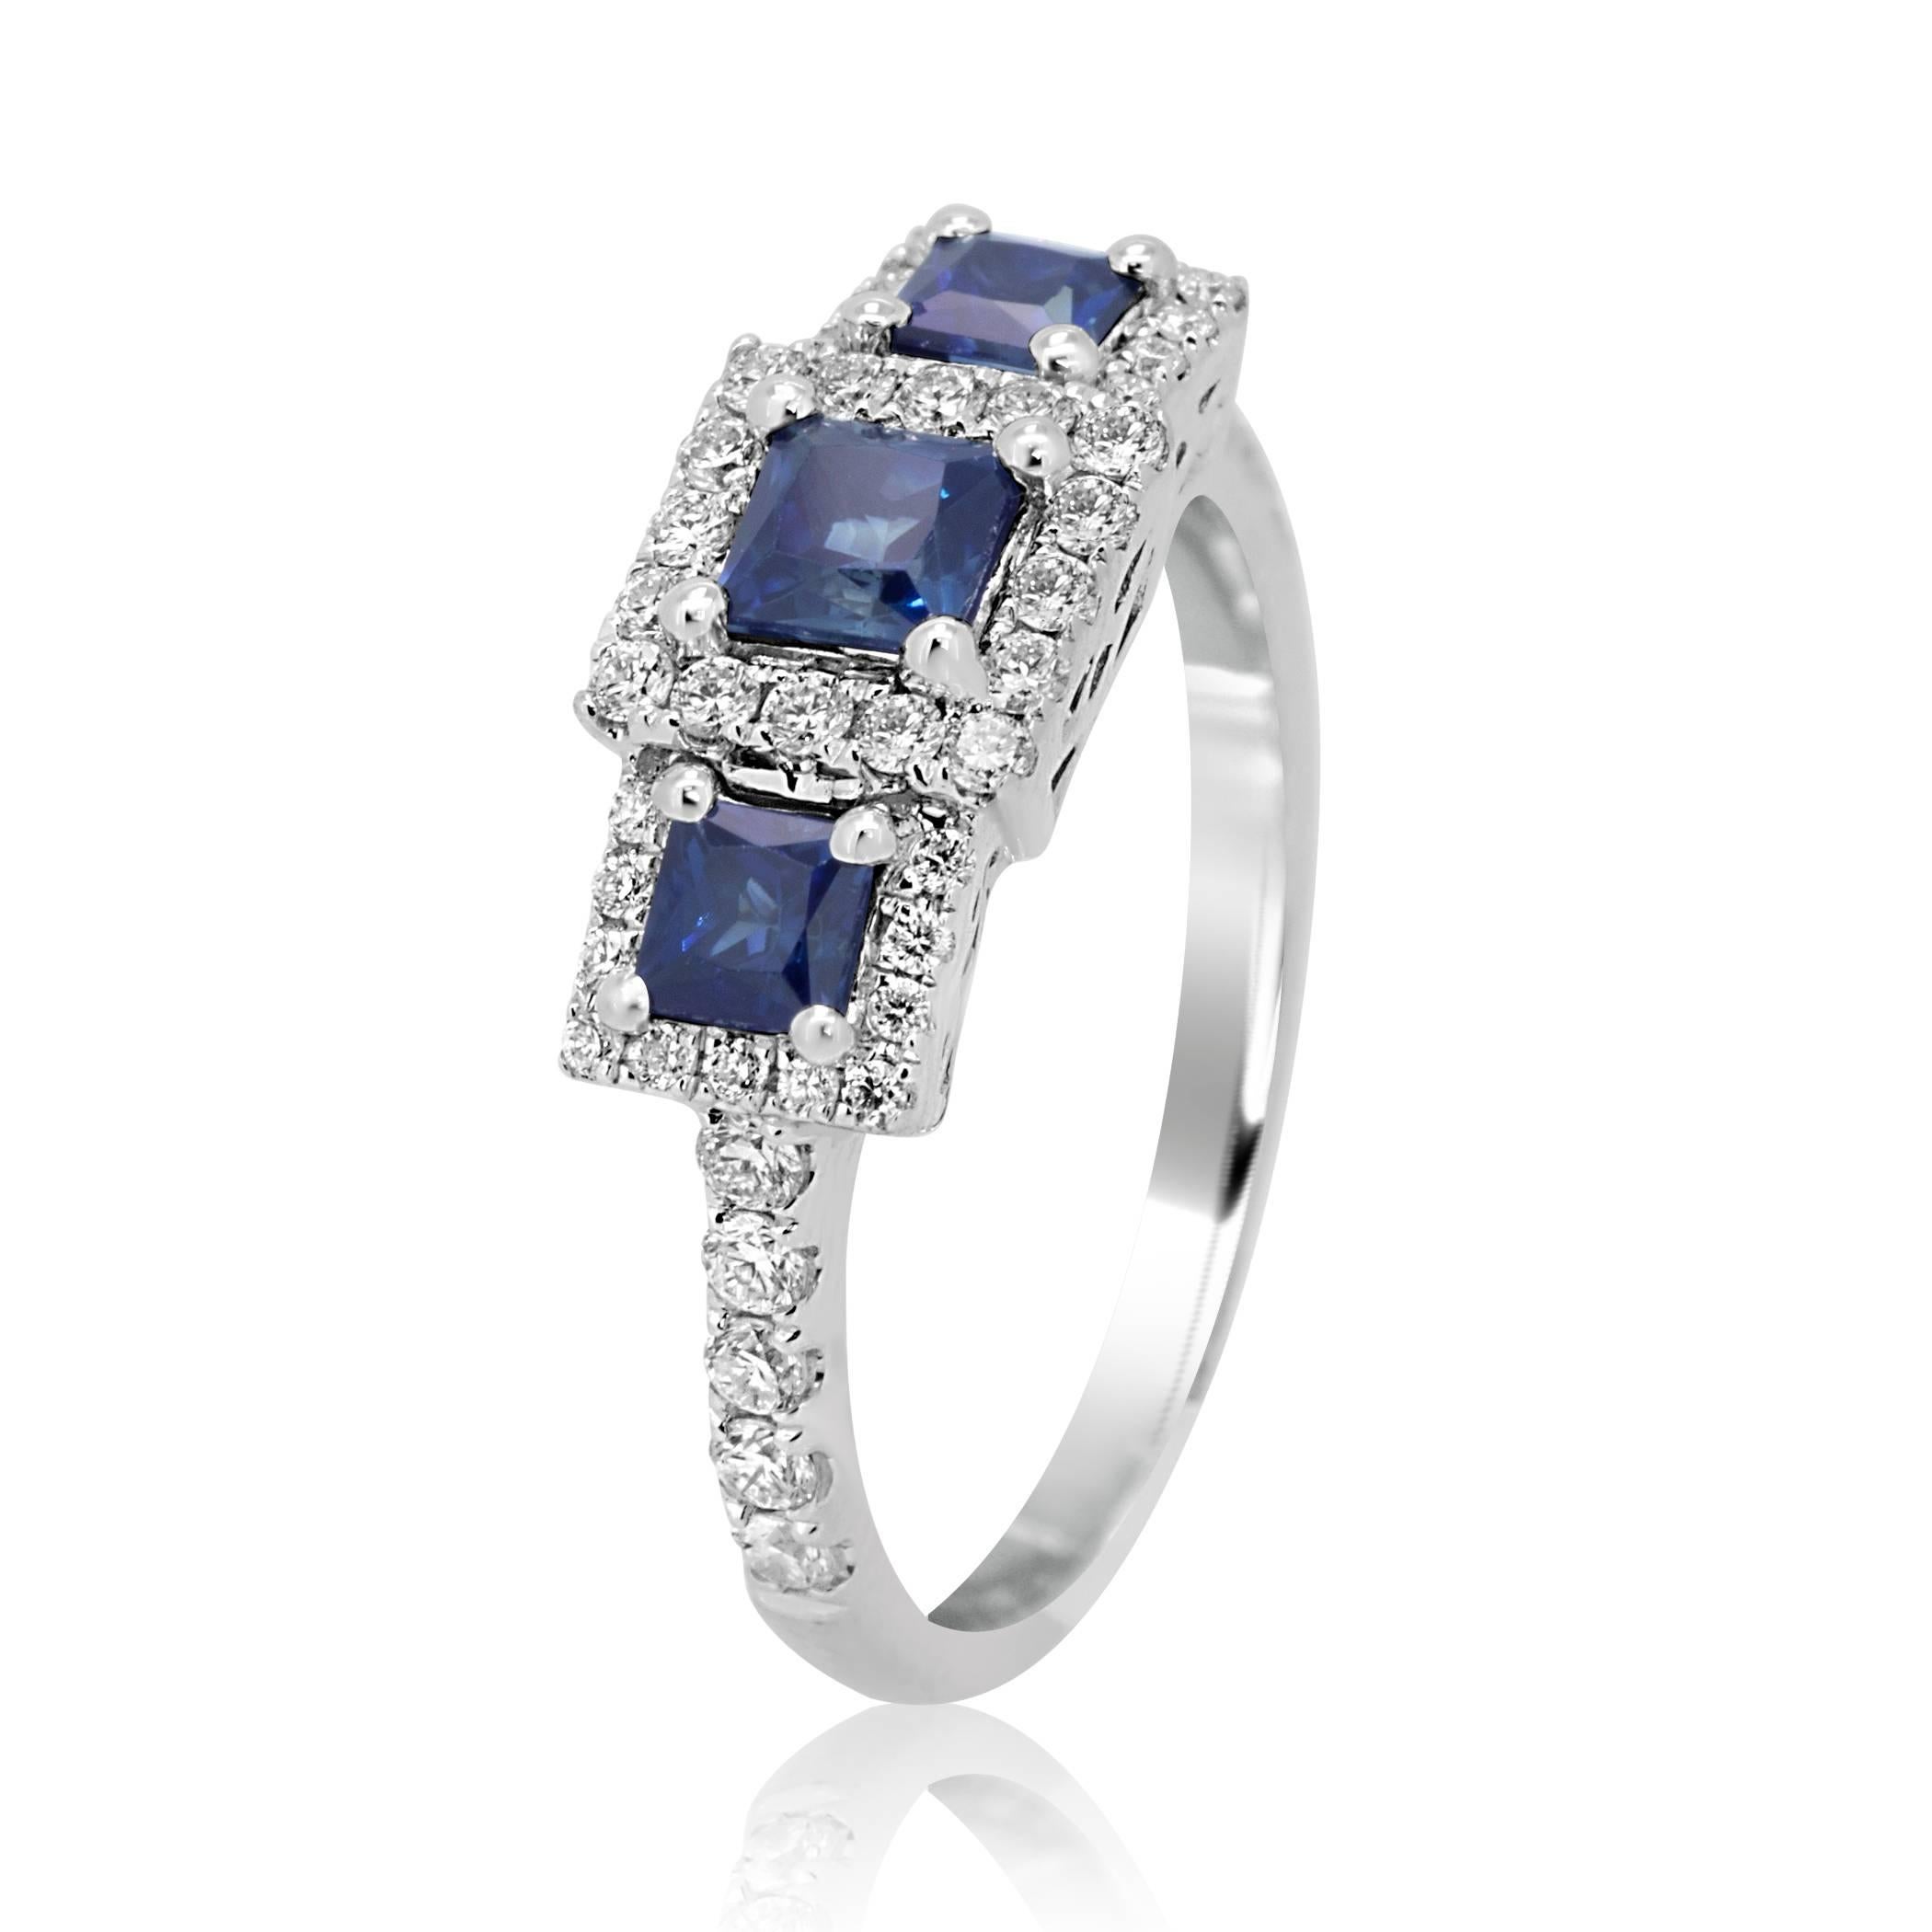 Princess Cut Blue sapphire three stone 0.85 carat encircled in Halo of White Diamond Round 48 stones 0.41 carat in 14K White Gold Three Stone Fashion Cocktail Ring.

Style available in different price ranges can be customized or custom made as per